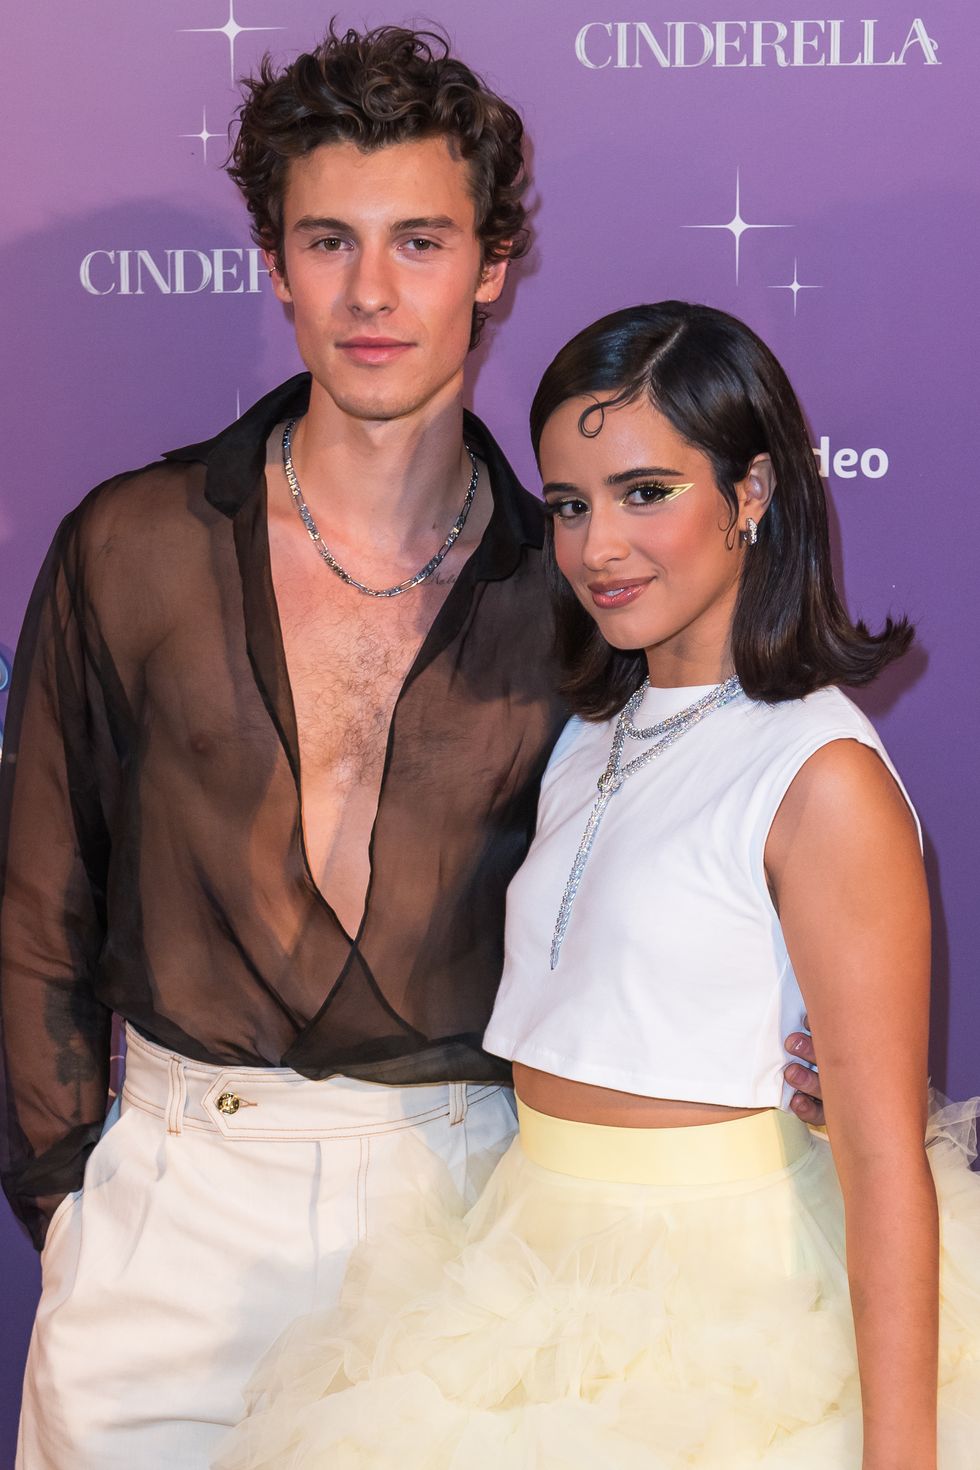 miami, florida   september 01 l r shawn mendes and camila cabello attend the cinderella miami premiere at vizcaya museum  gardens on september 01, 2021 in miami, florida photo by jason koernergetty images